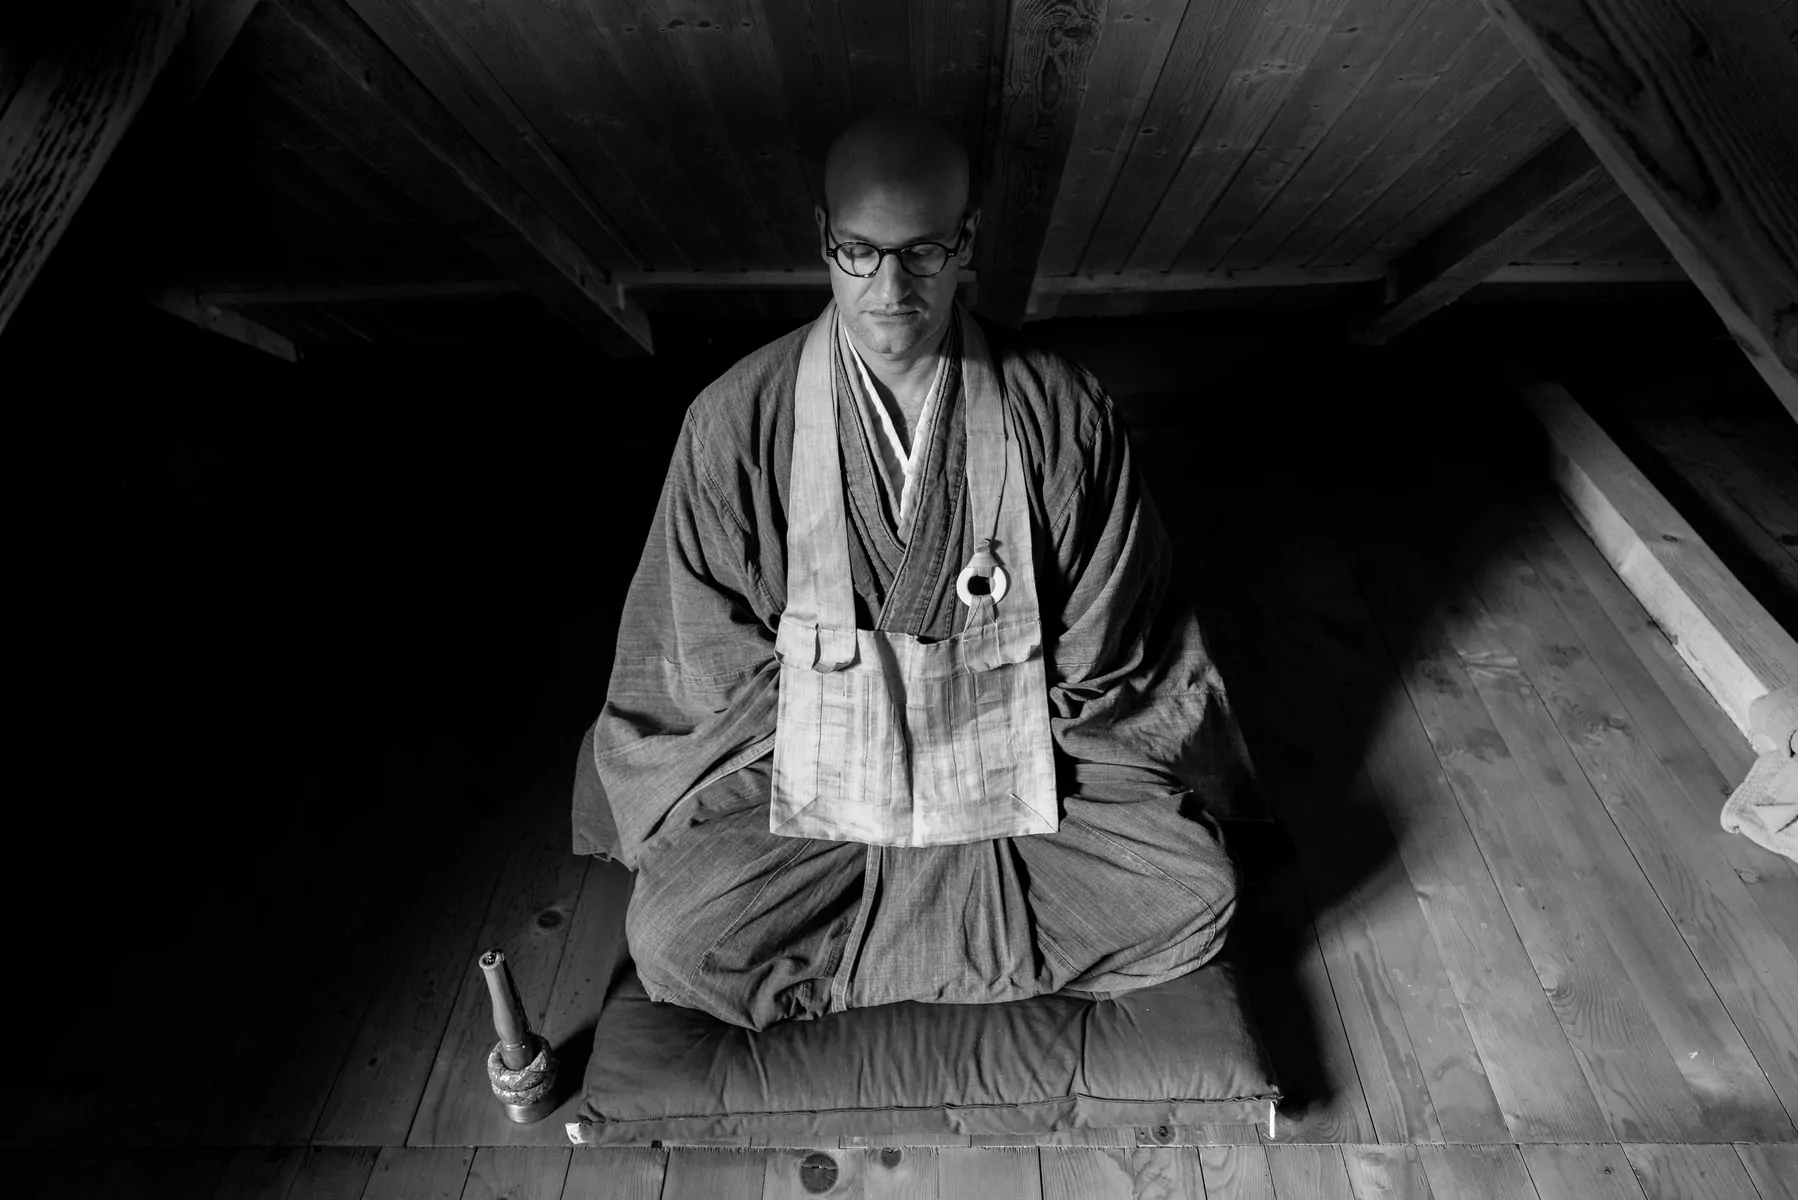 Loneliness - The life of a zen monk